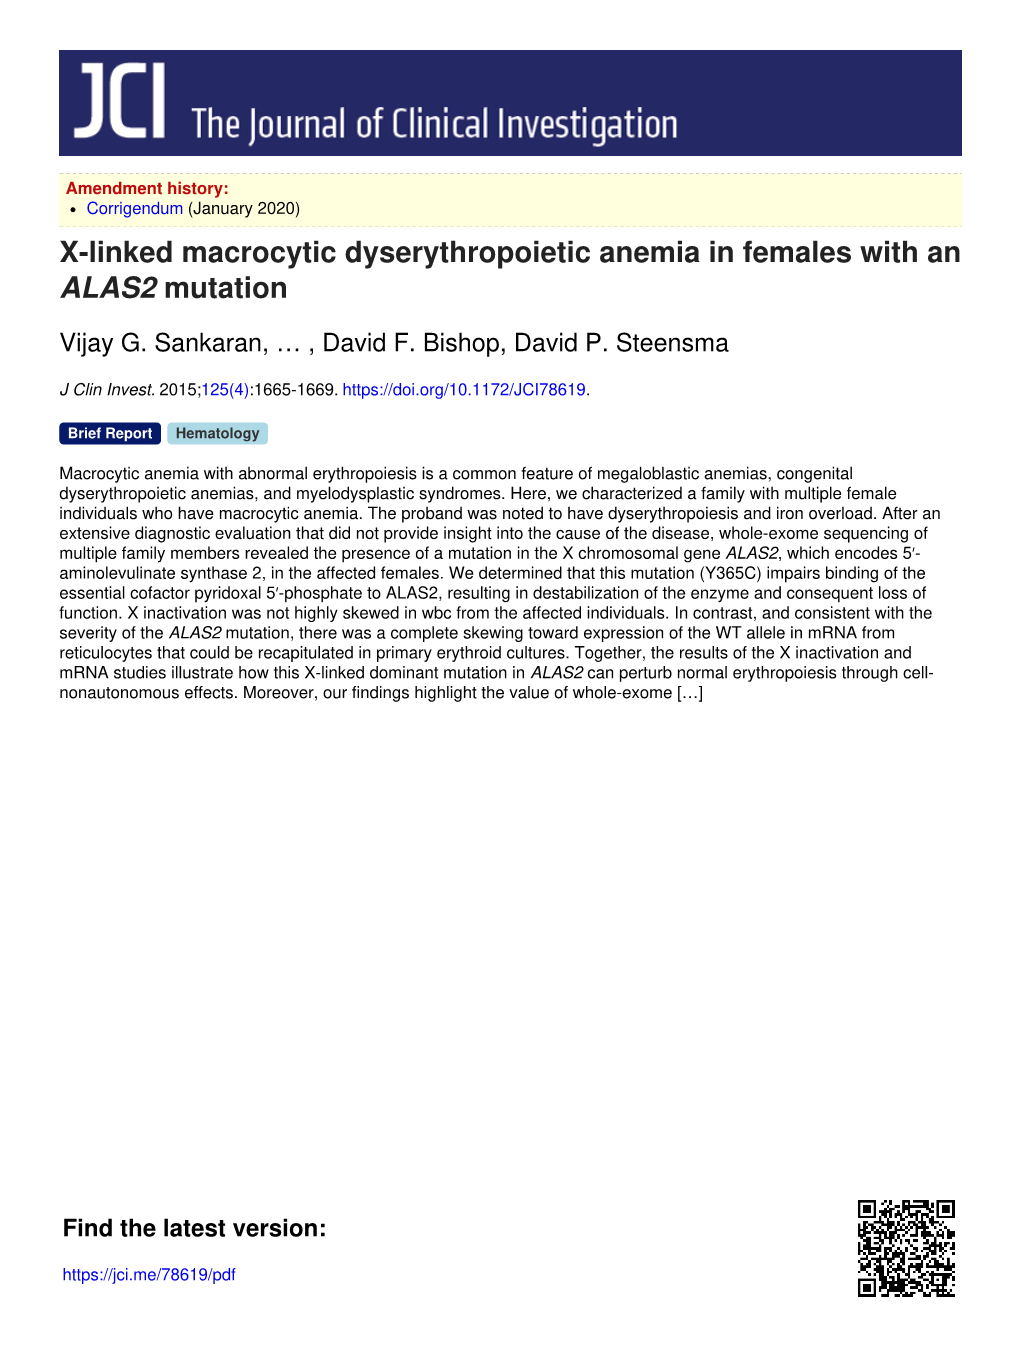 X-Linked Macrocytic Dyserythropoietic Anemia in Females with an ALAS2 Mutation